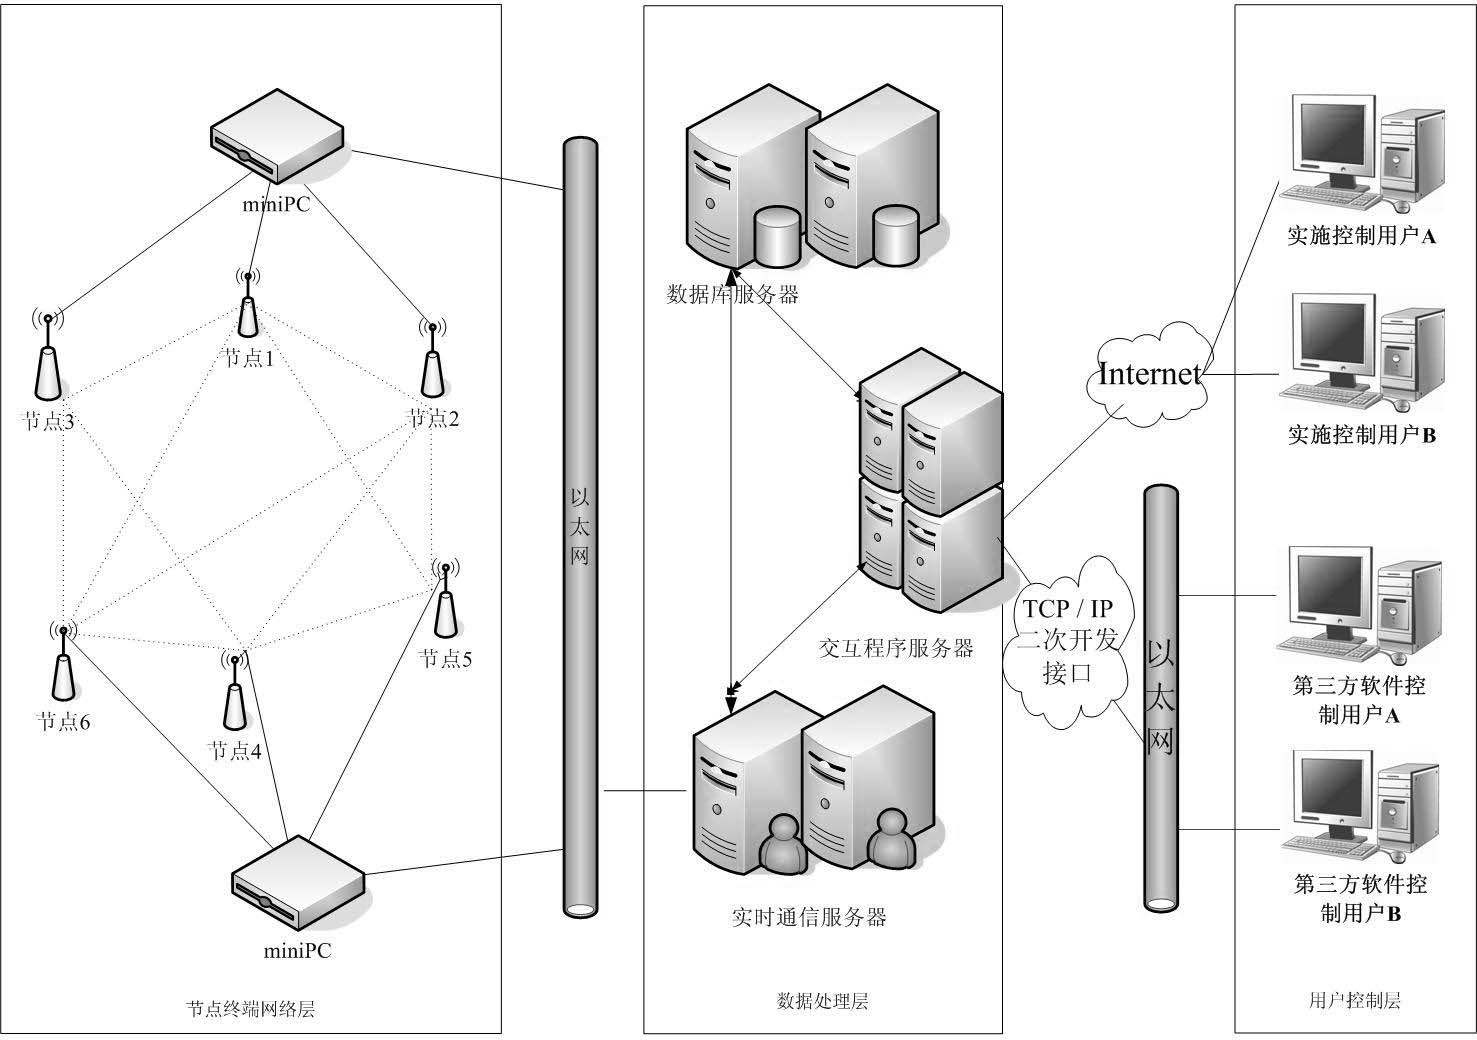 Distributed interactive method for large-scale wireless sensor network